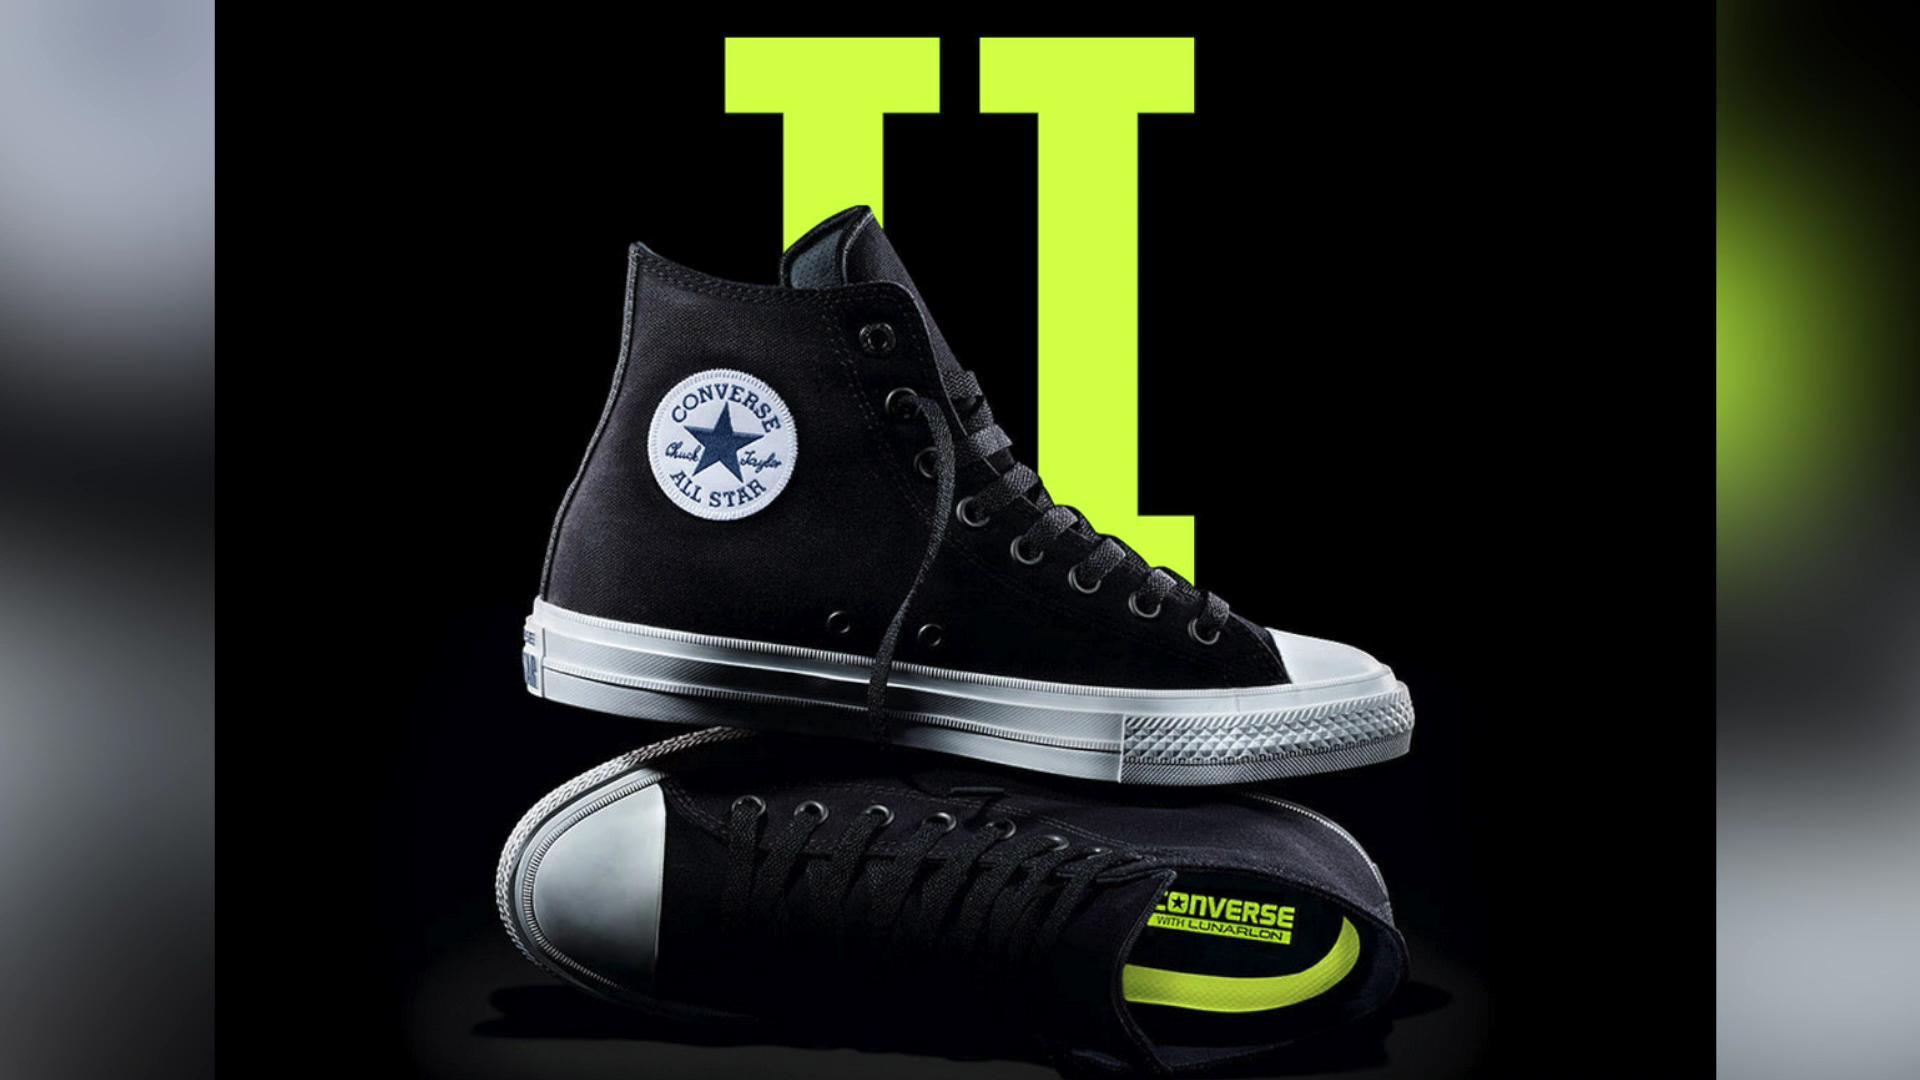 The Athletic History of the Converse Chuck Taylor: A Shoe for Punks